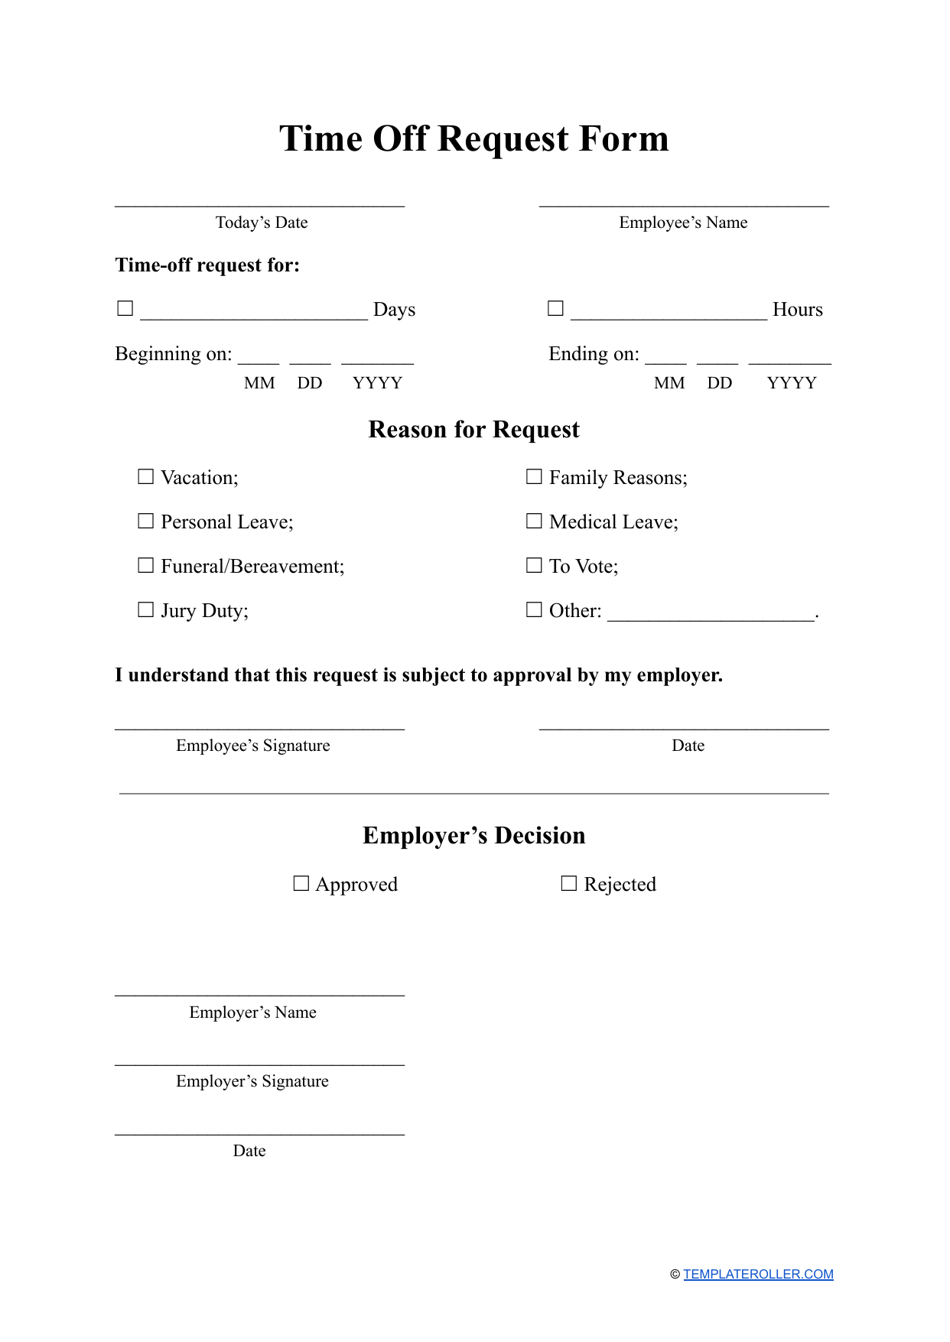 Time off Request Form, Page 1